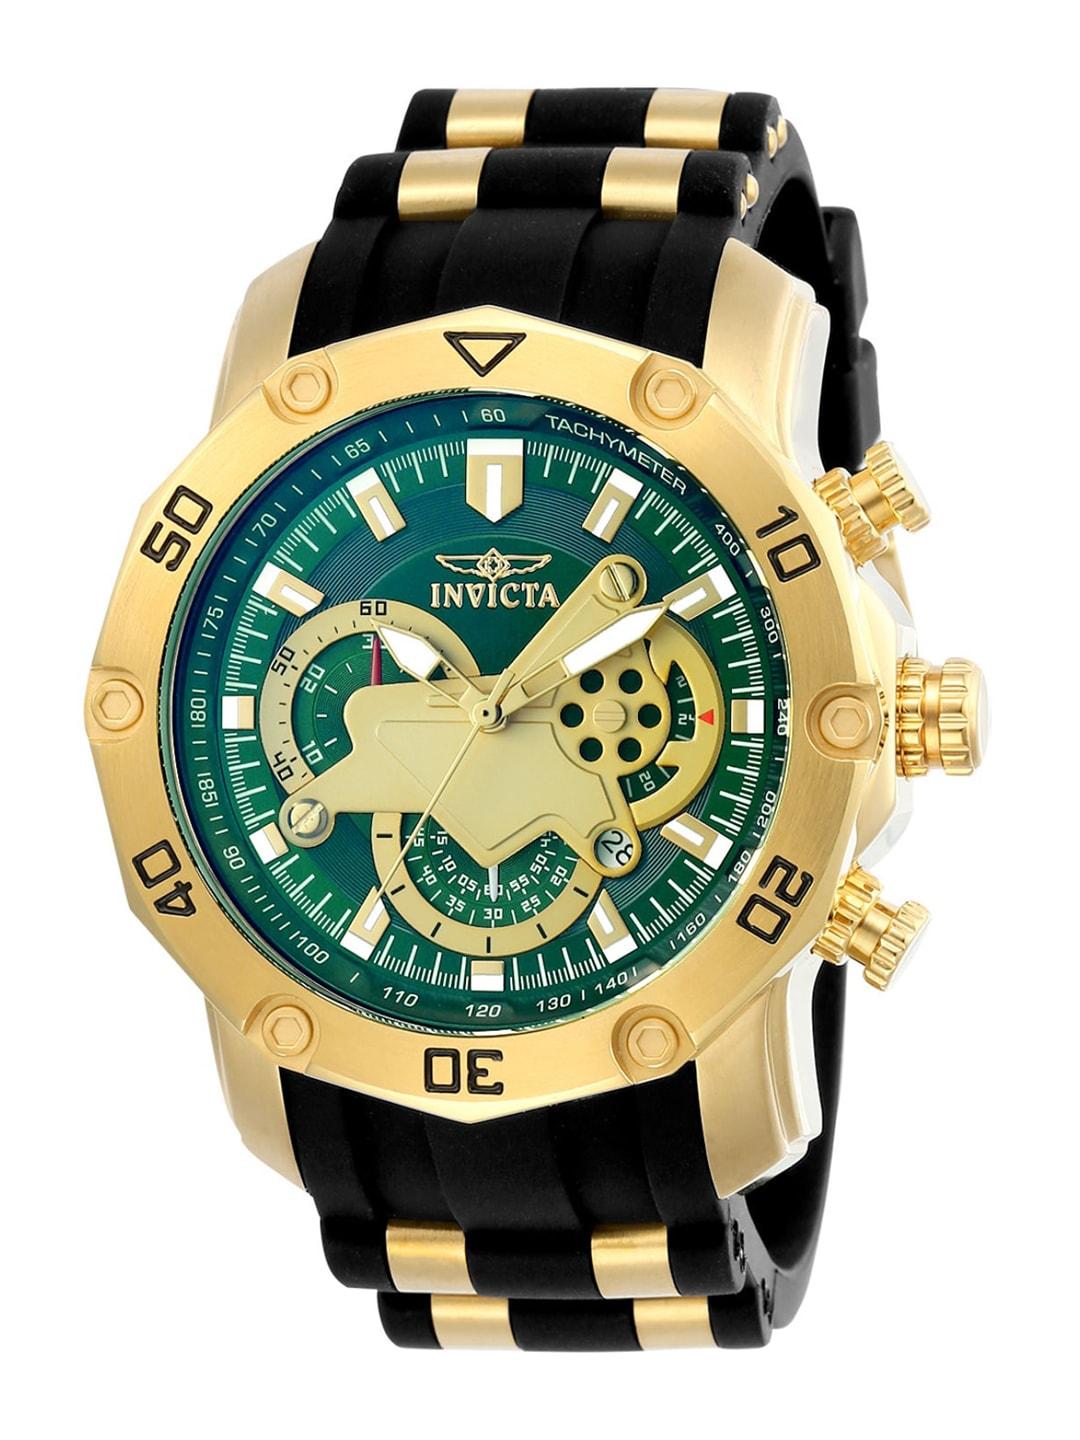 invicta-unisex-stainless-steel-bracelet-style-straps-reset-time-analogue-watch-23425